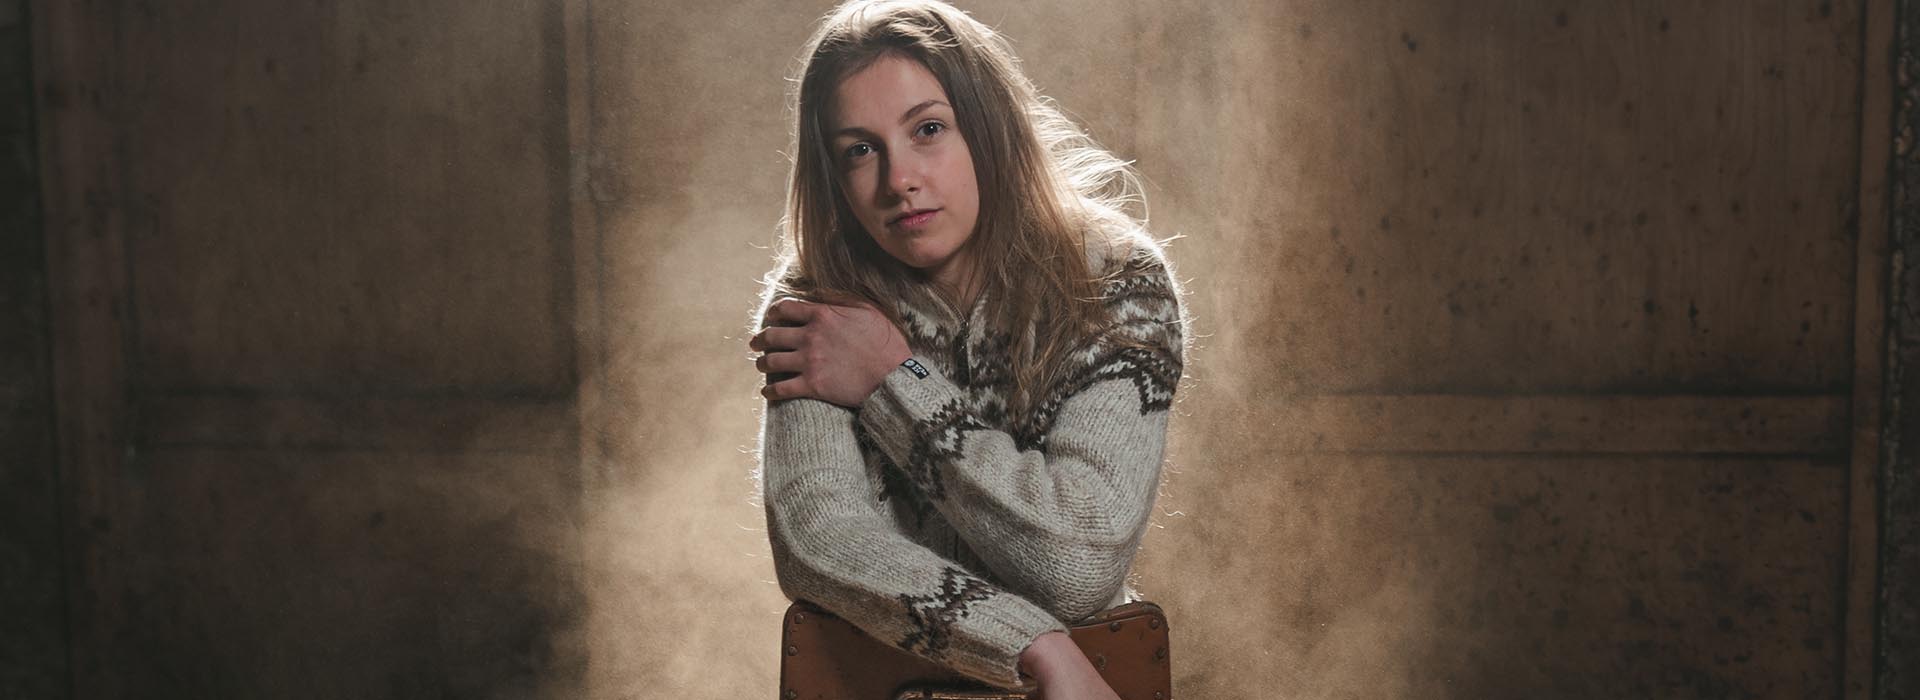 young woman sitting dressed in wool sweater